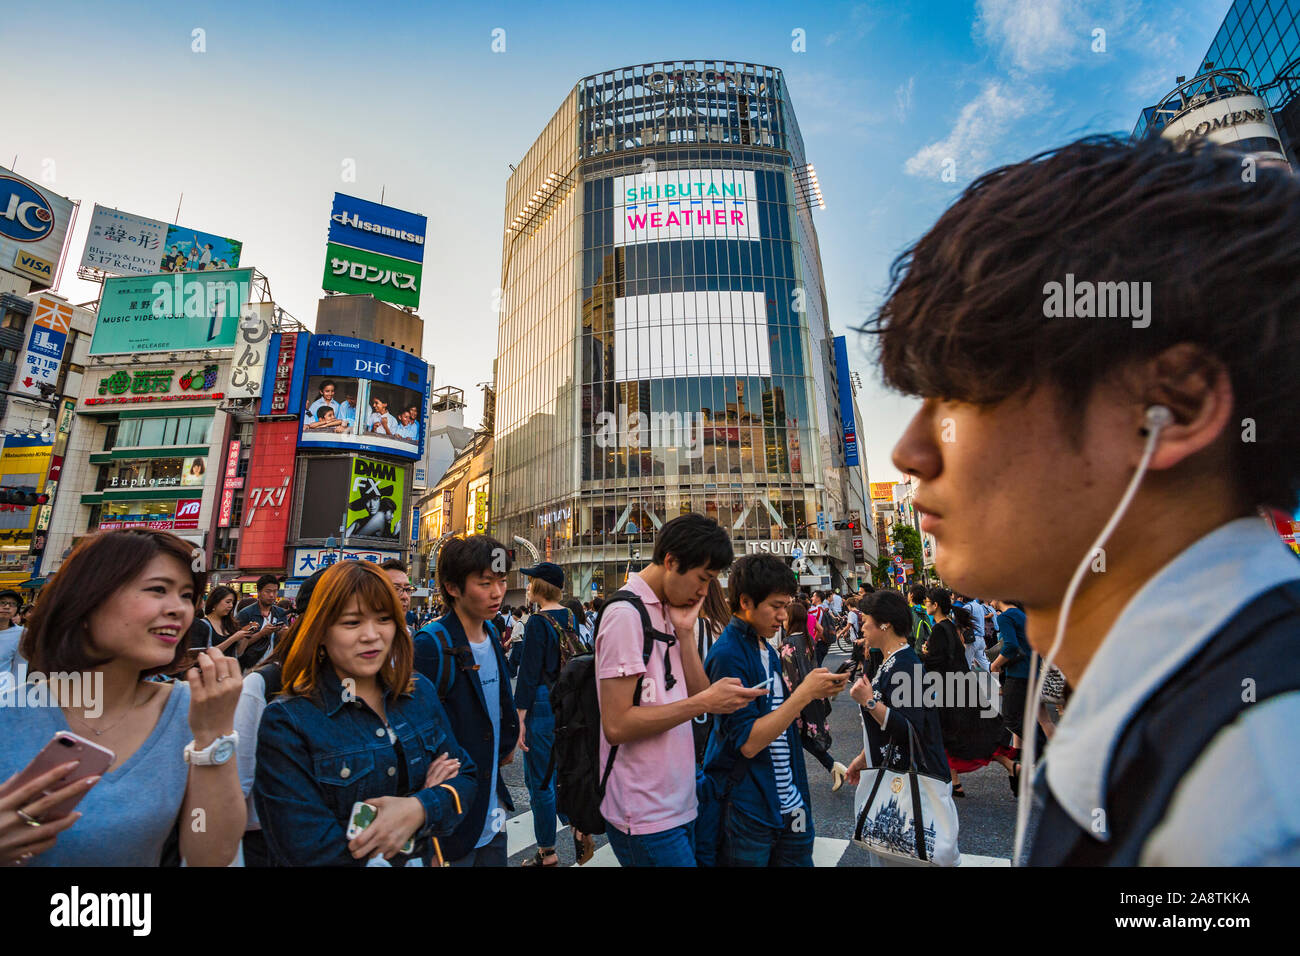 Shibuya Crossing, the busiest intersection in the World, Tokyo, Japan, Asia Stock Photo